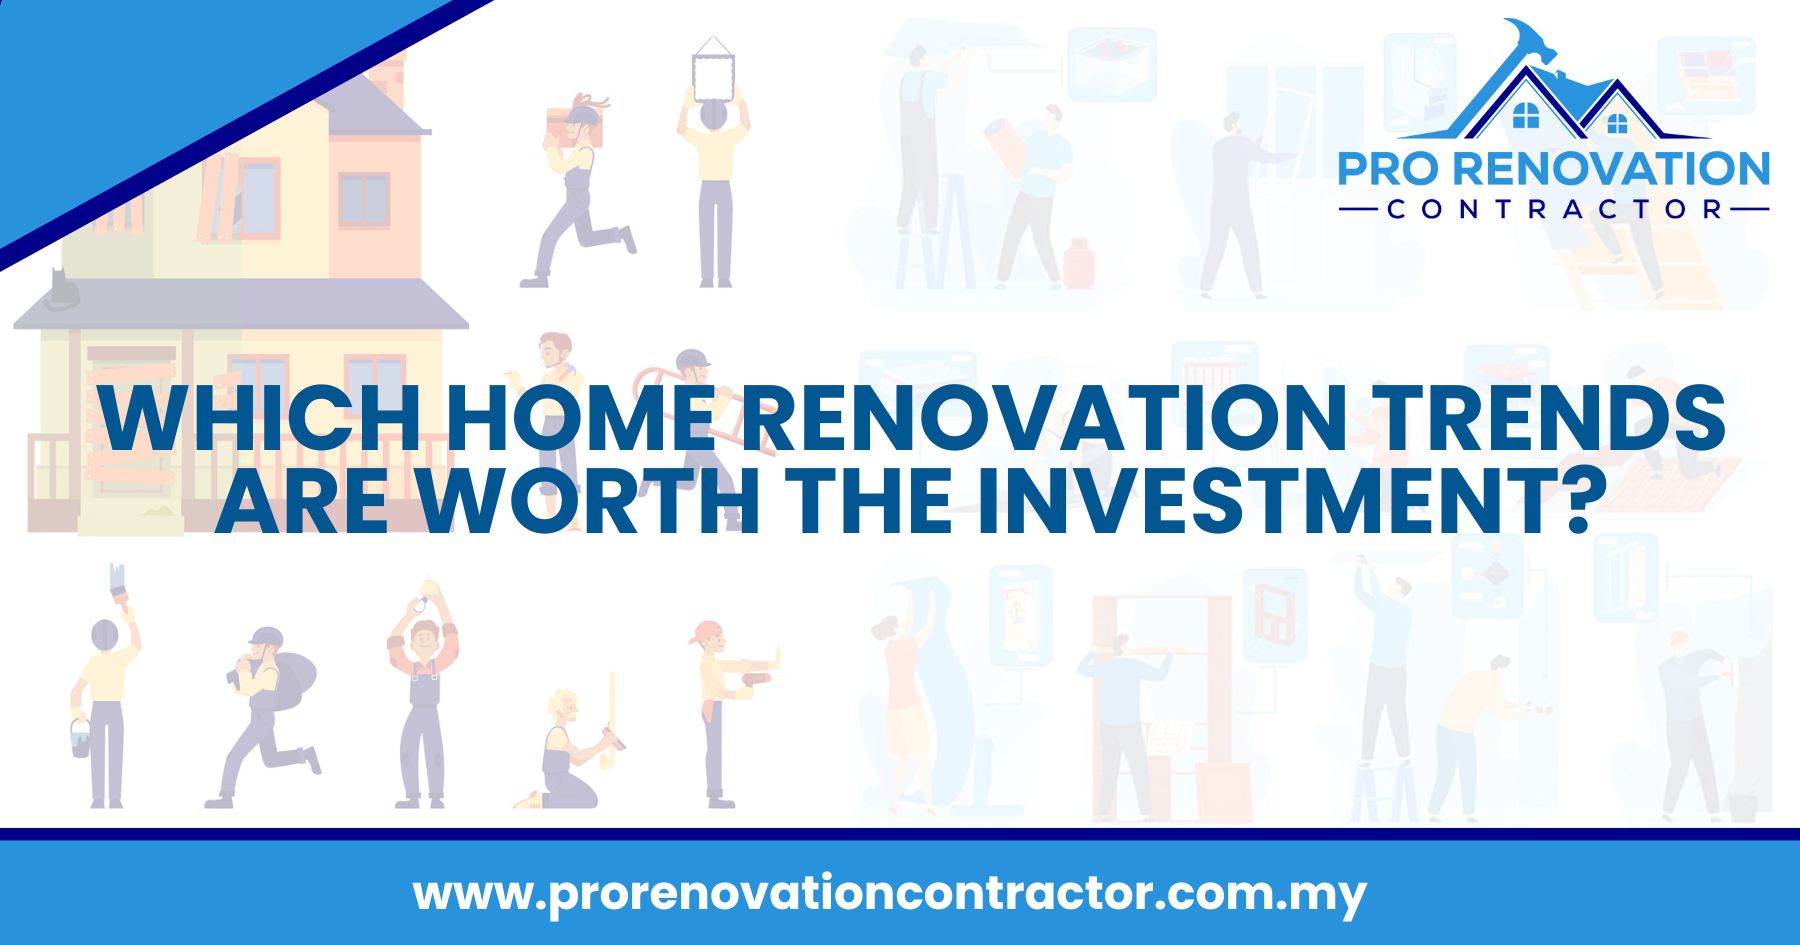 Which Home Renovation Trends Are Worth the Investment?